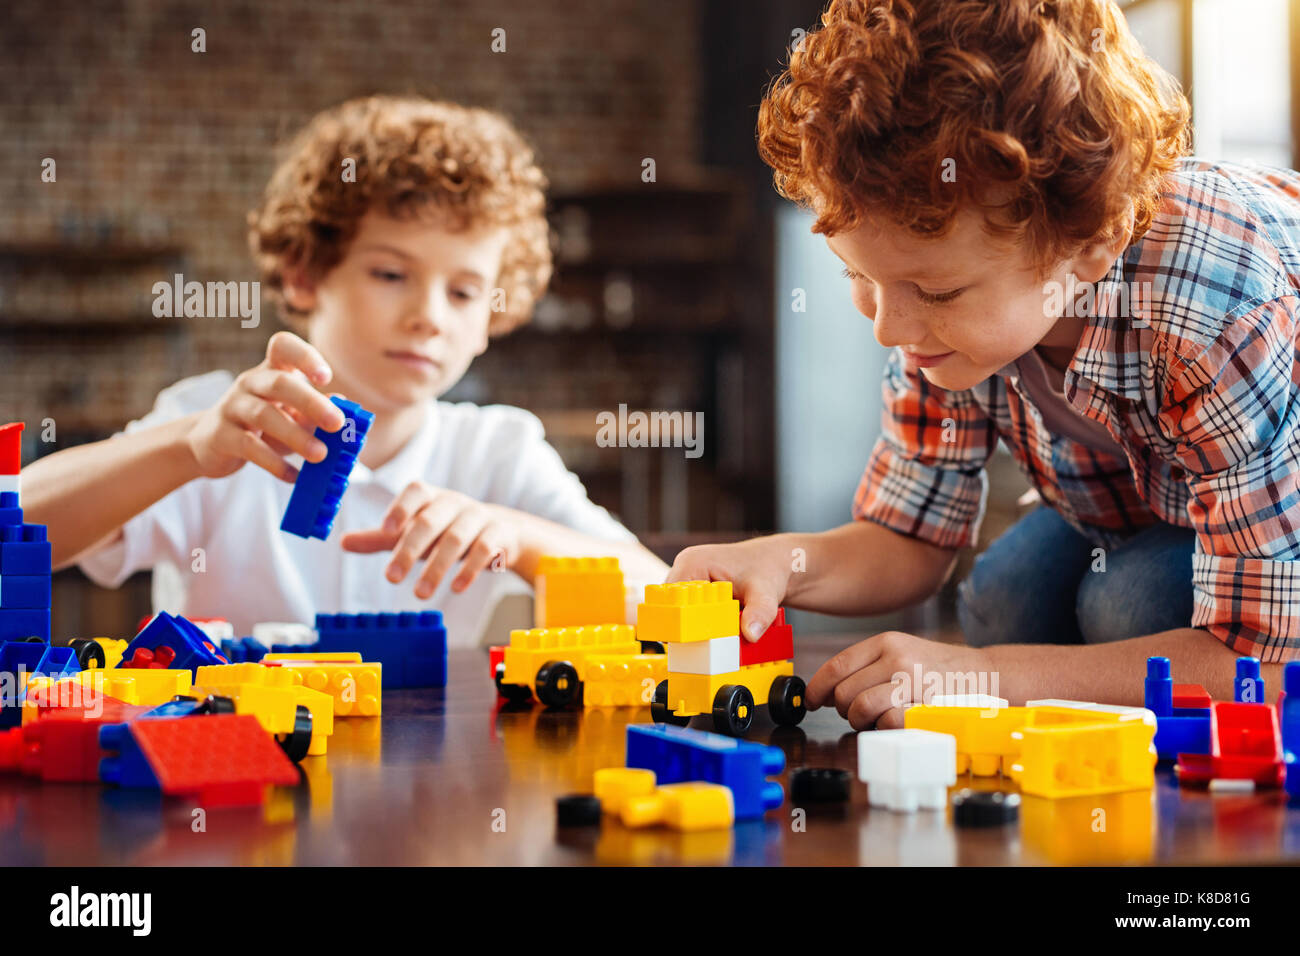 Cute ginger haired boy building car on table Stock Photo